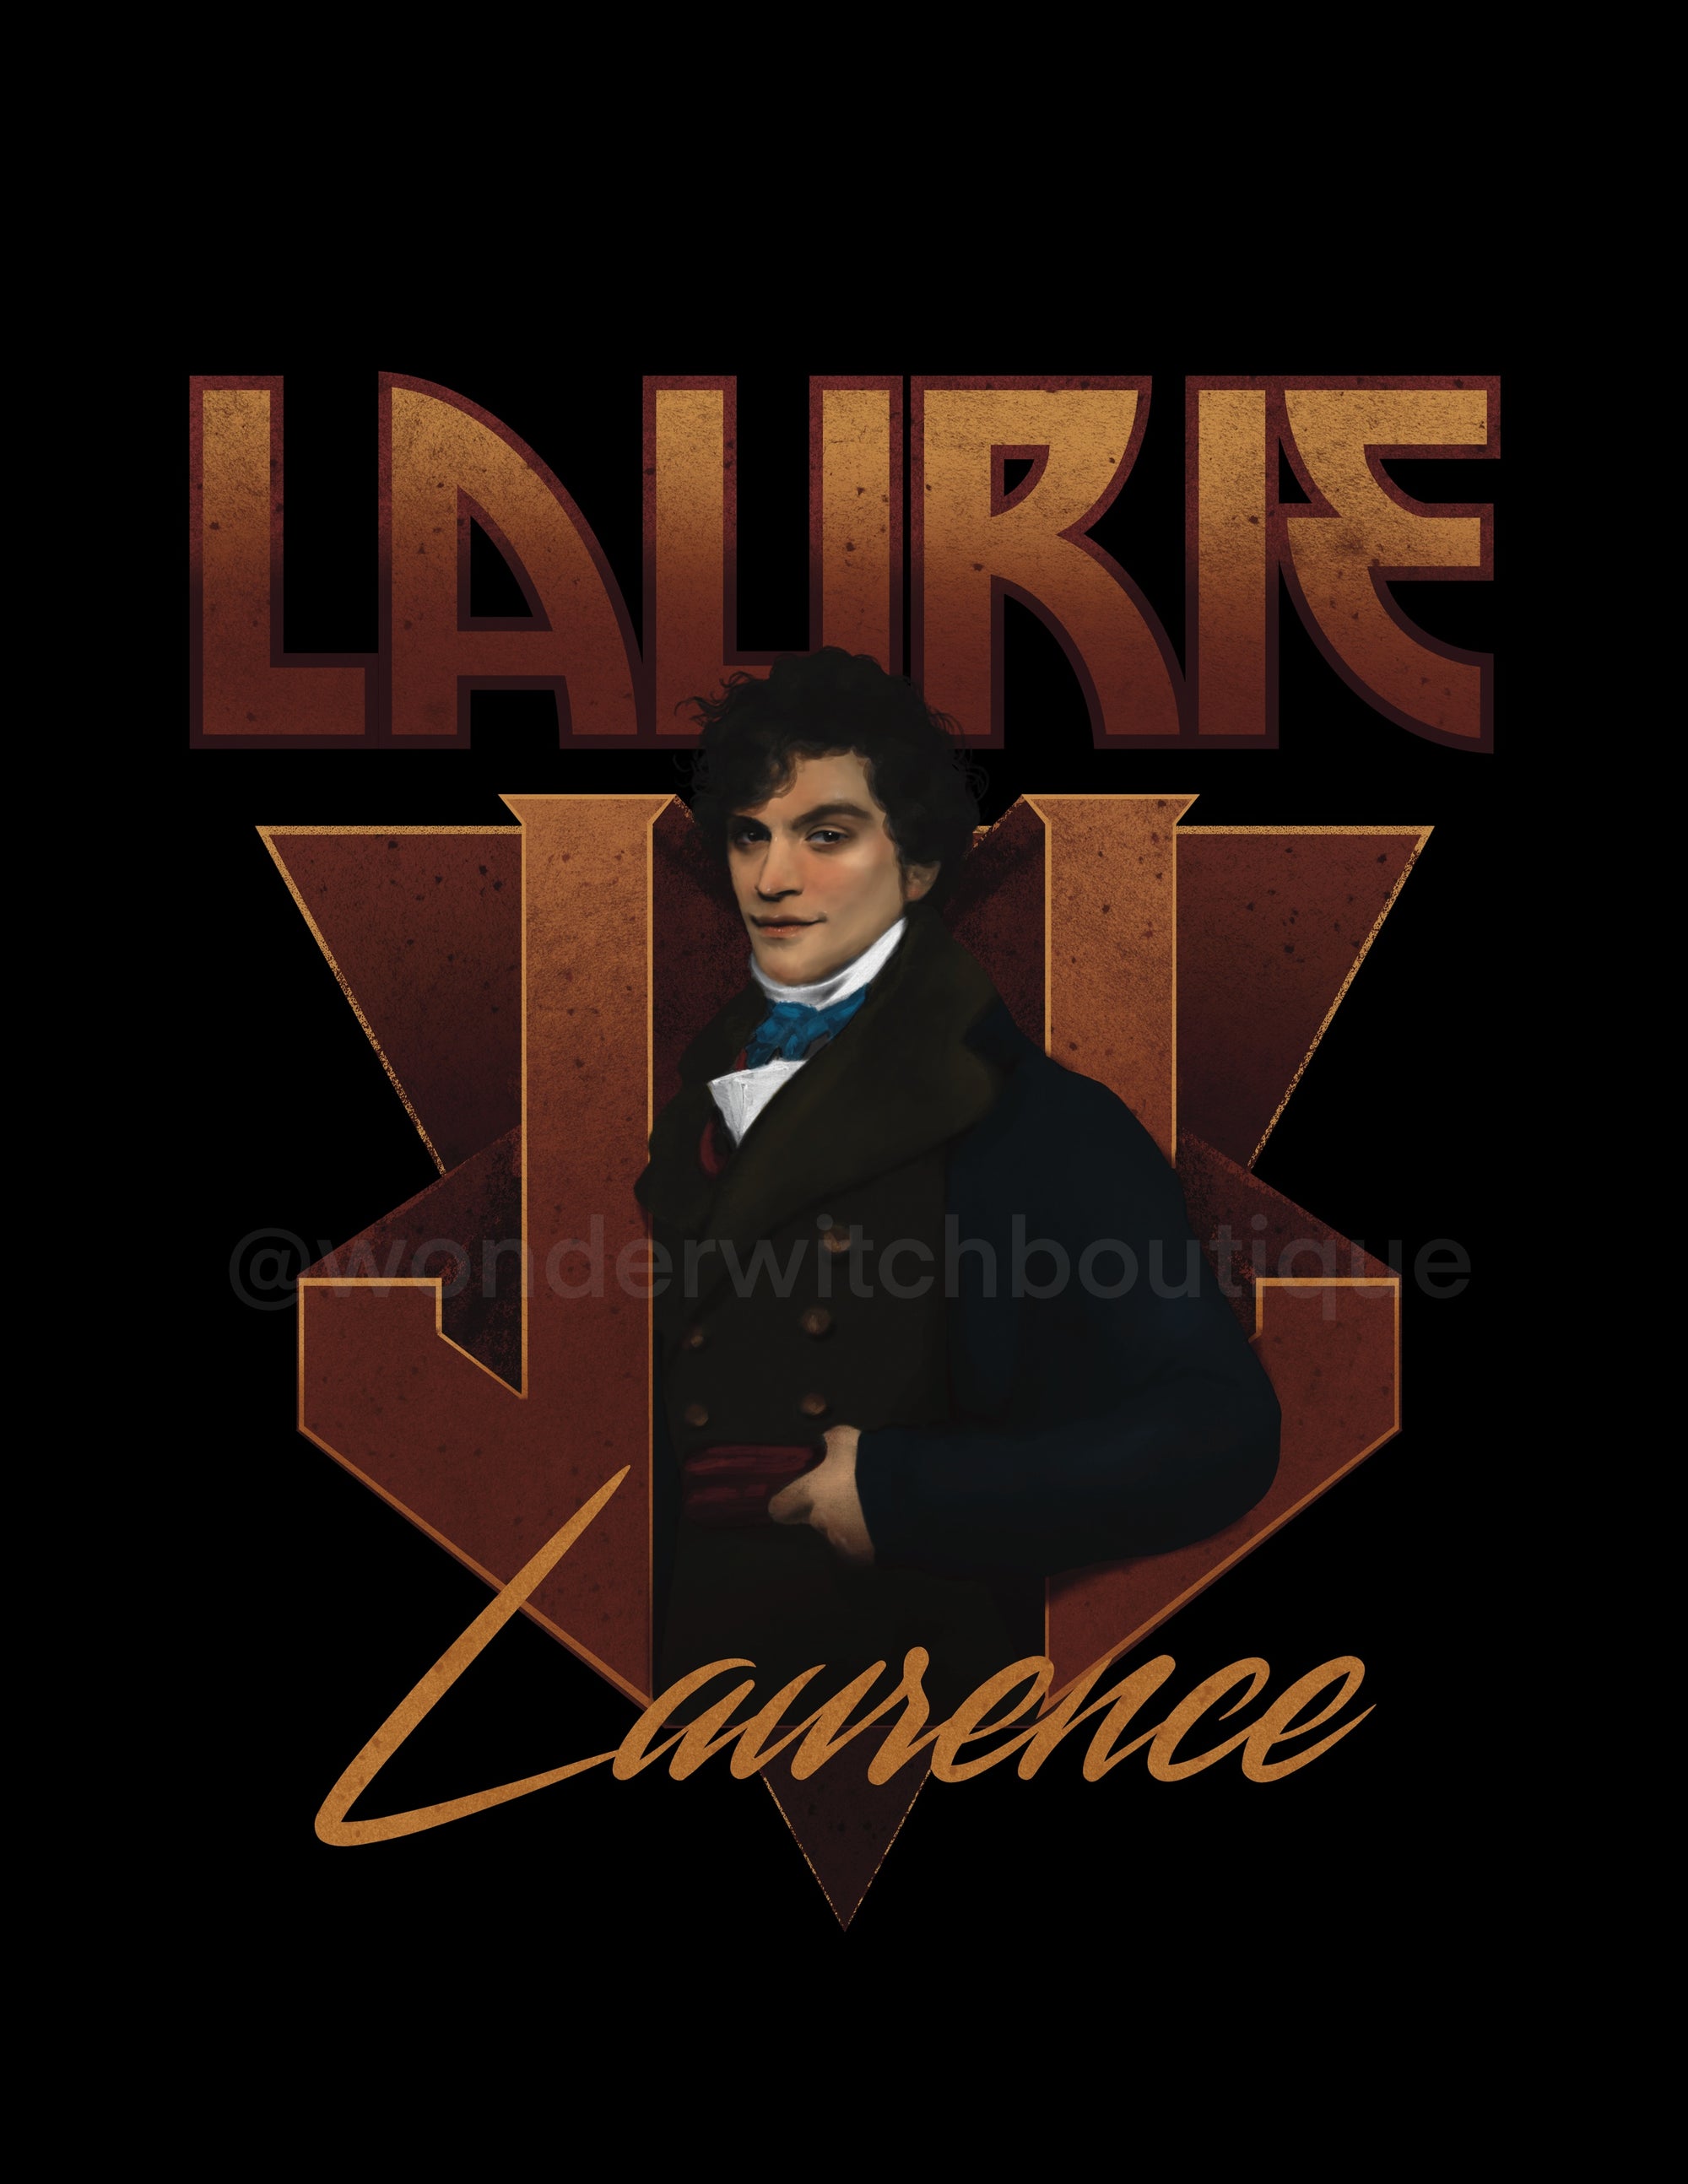 Laurie Laurence Band Tee